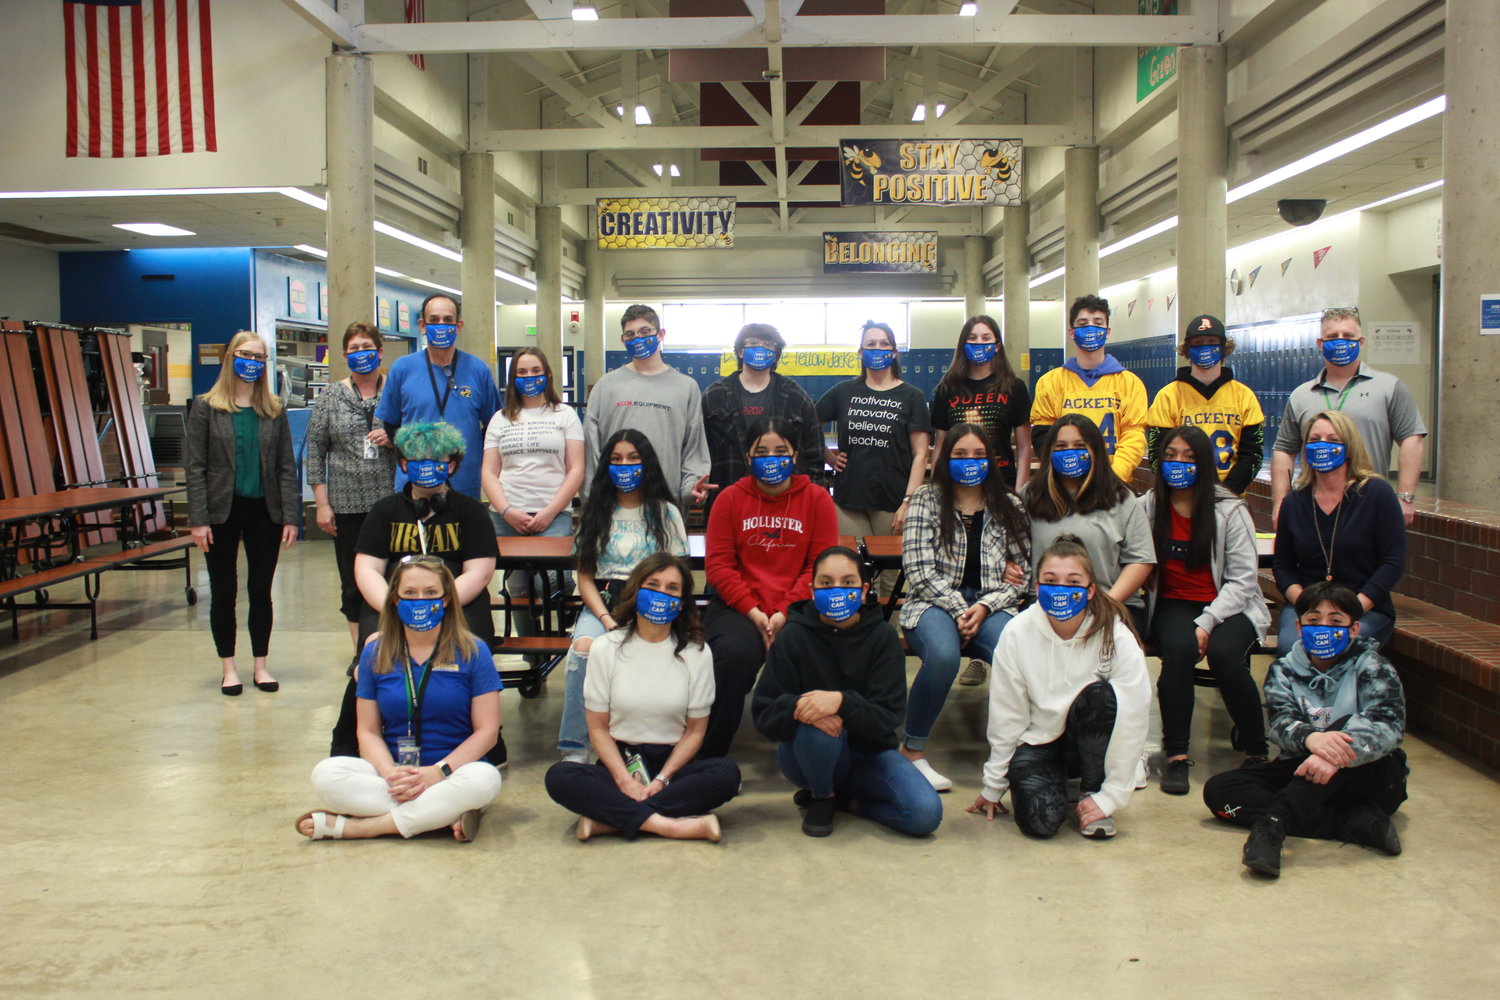 A partnership between Educational Service District 113 and the Centralia Prevention Coalition has gifted reusable masks to all staff and students at Centralia Middle School. The masks are adorned with the school’s Yellow Jacket mascot as well as a prevention message, “Believe in Yourself,” that was voted on by students. Students started receiving the masks last week. This provided photo was taken with Superintendent Dr. Lisa Grant, prevention staff and student leadership.